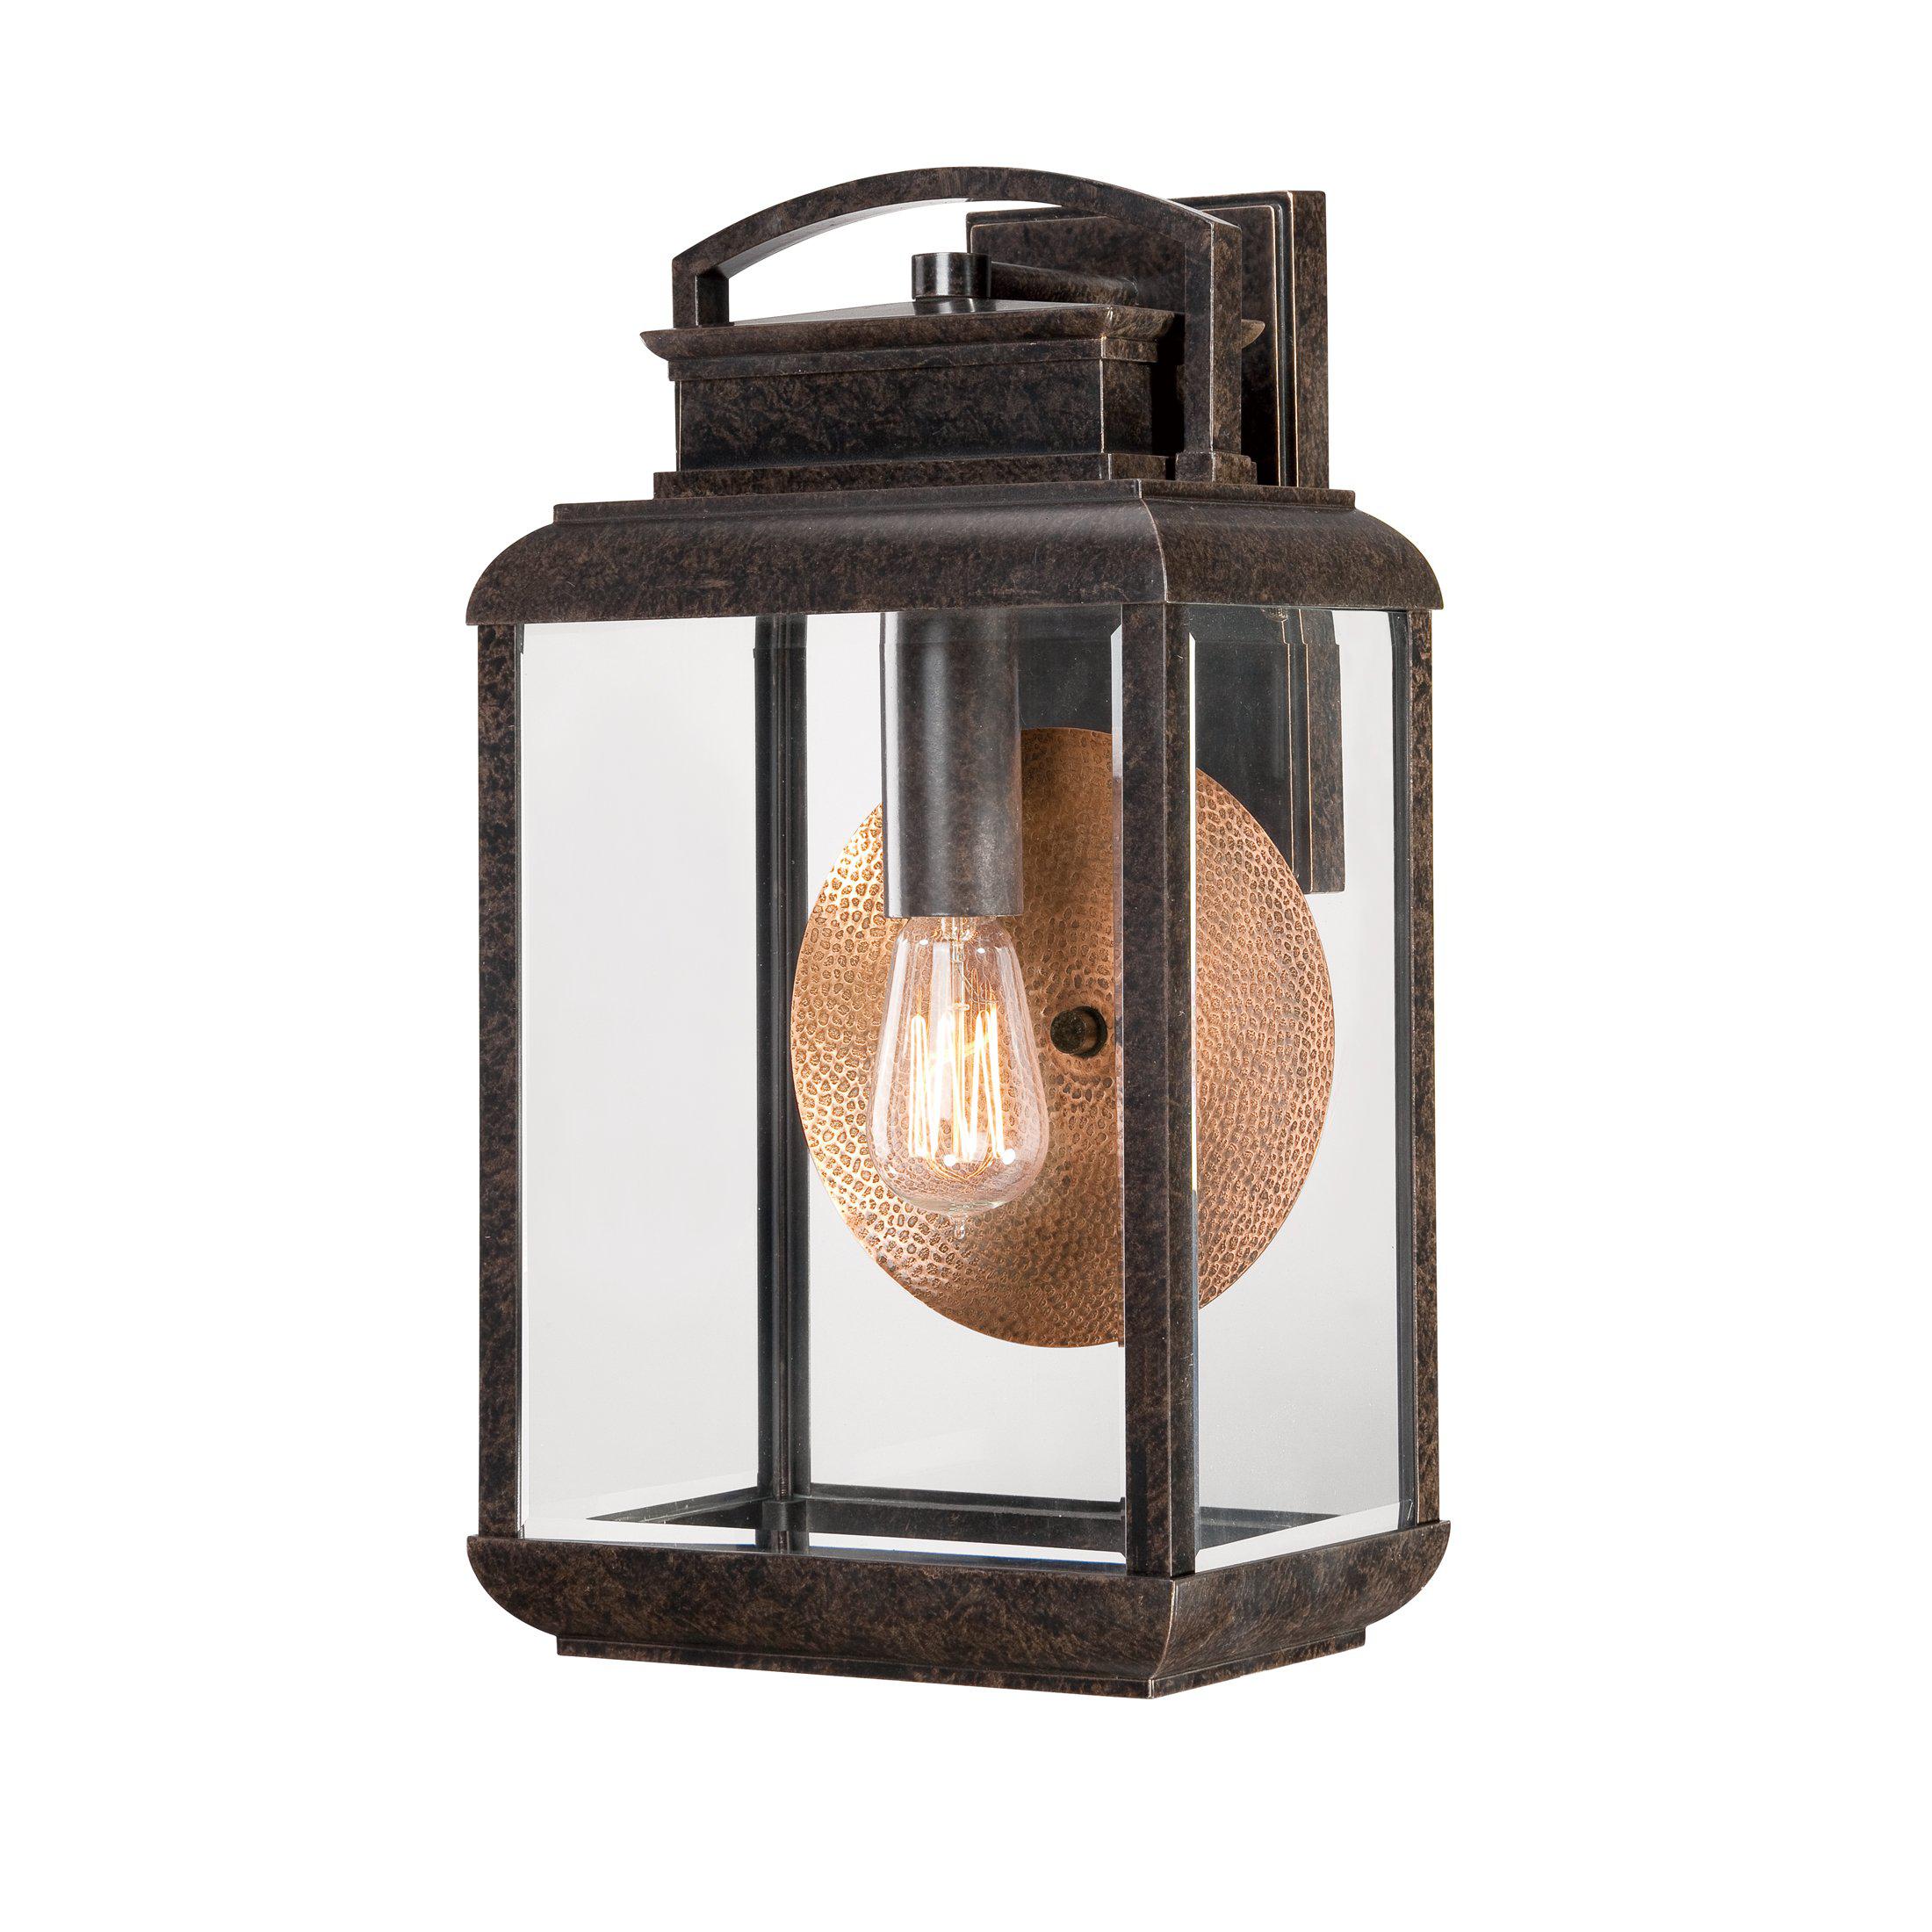 Quoizel  Byron Outdoor Lantern, Large Outdoor l Wall Quoizel Imperial Bronze  